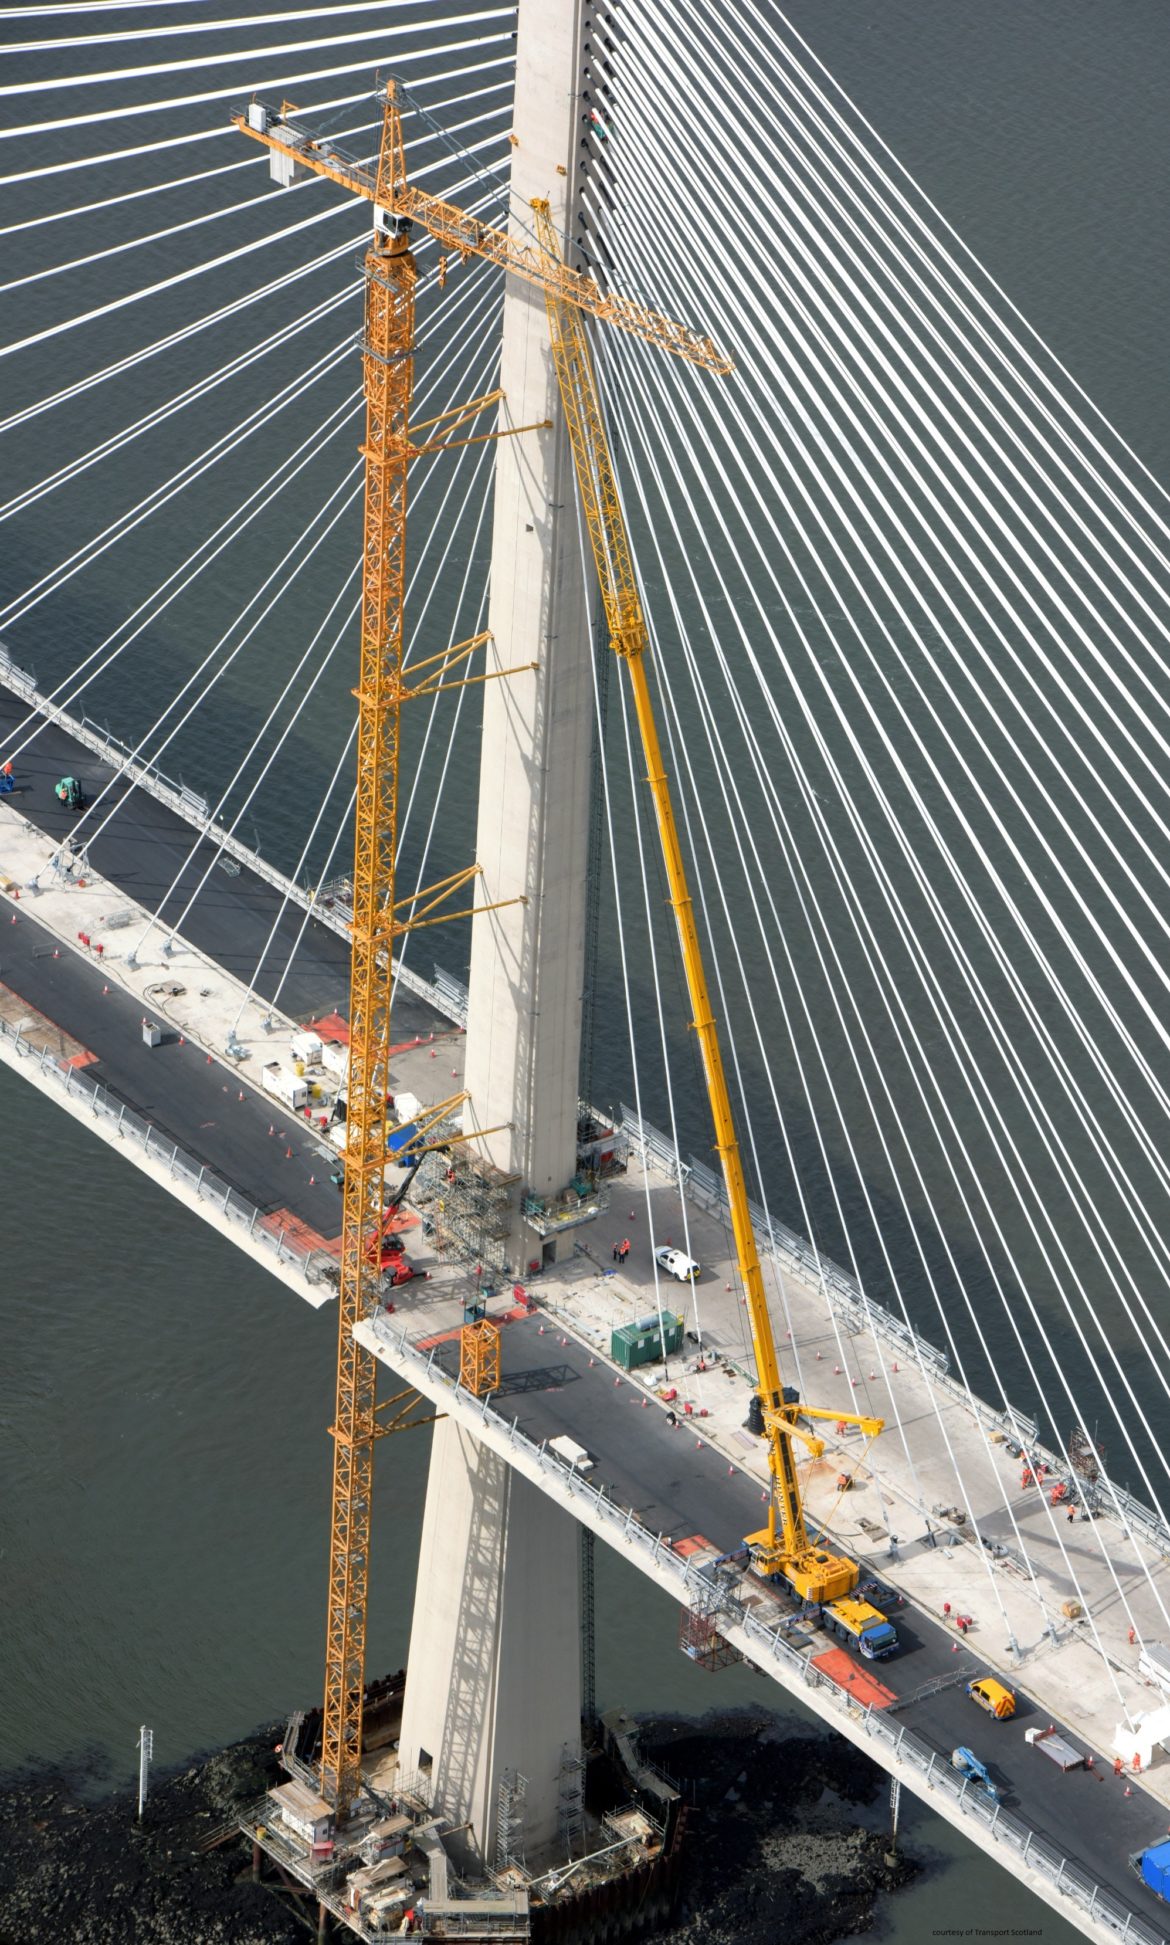 queensferry crossing